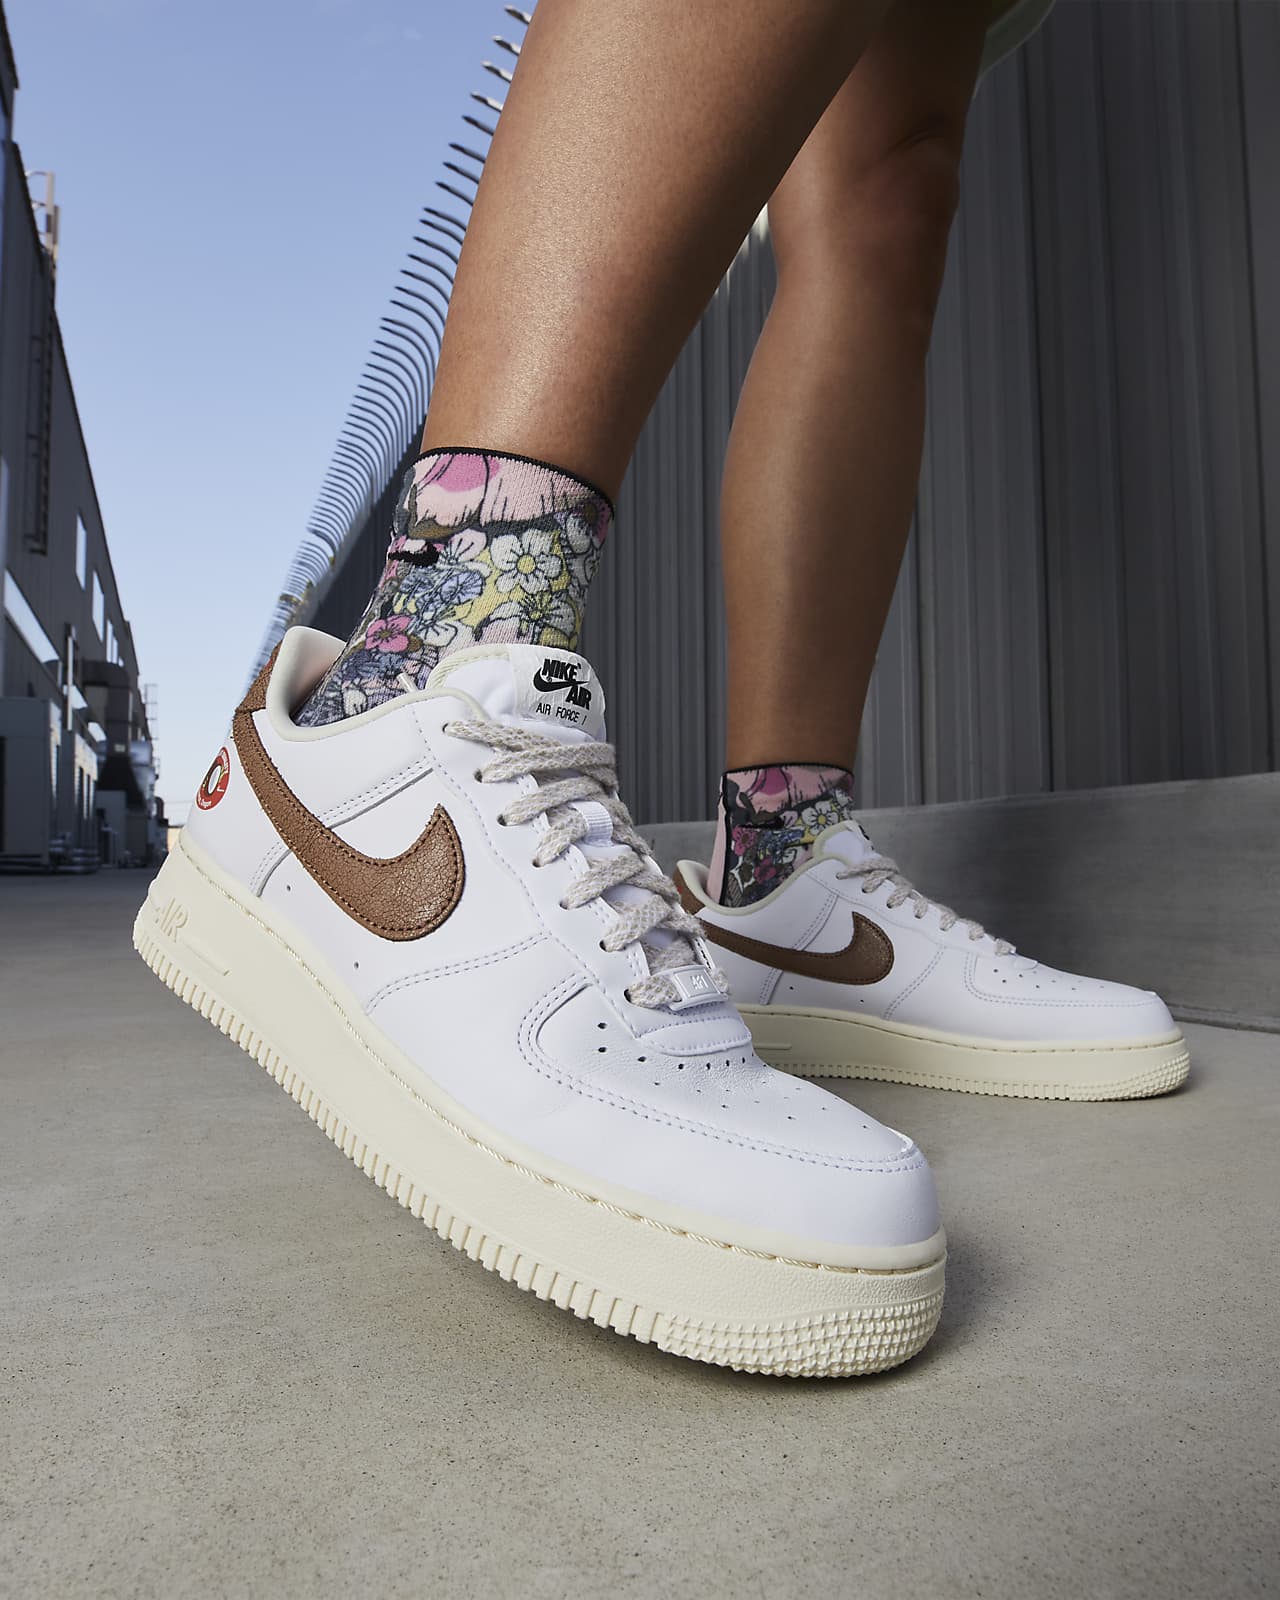 Nike Air Force 1 '07 LX Women's Shoes